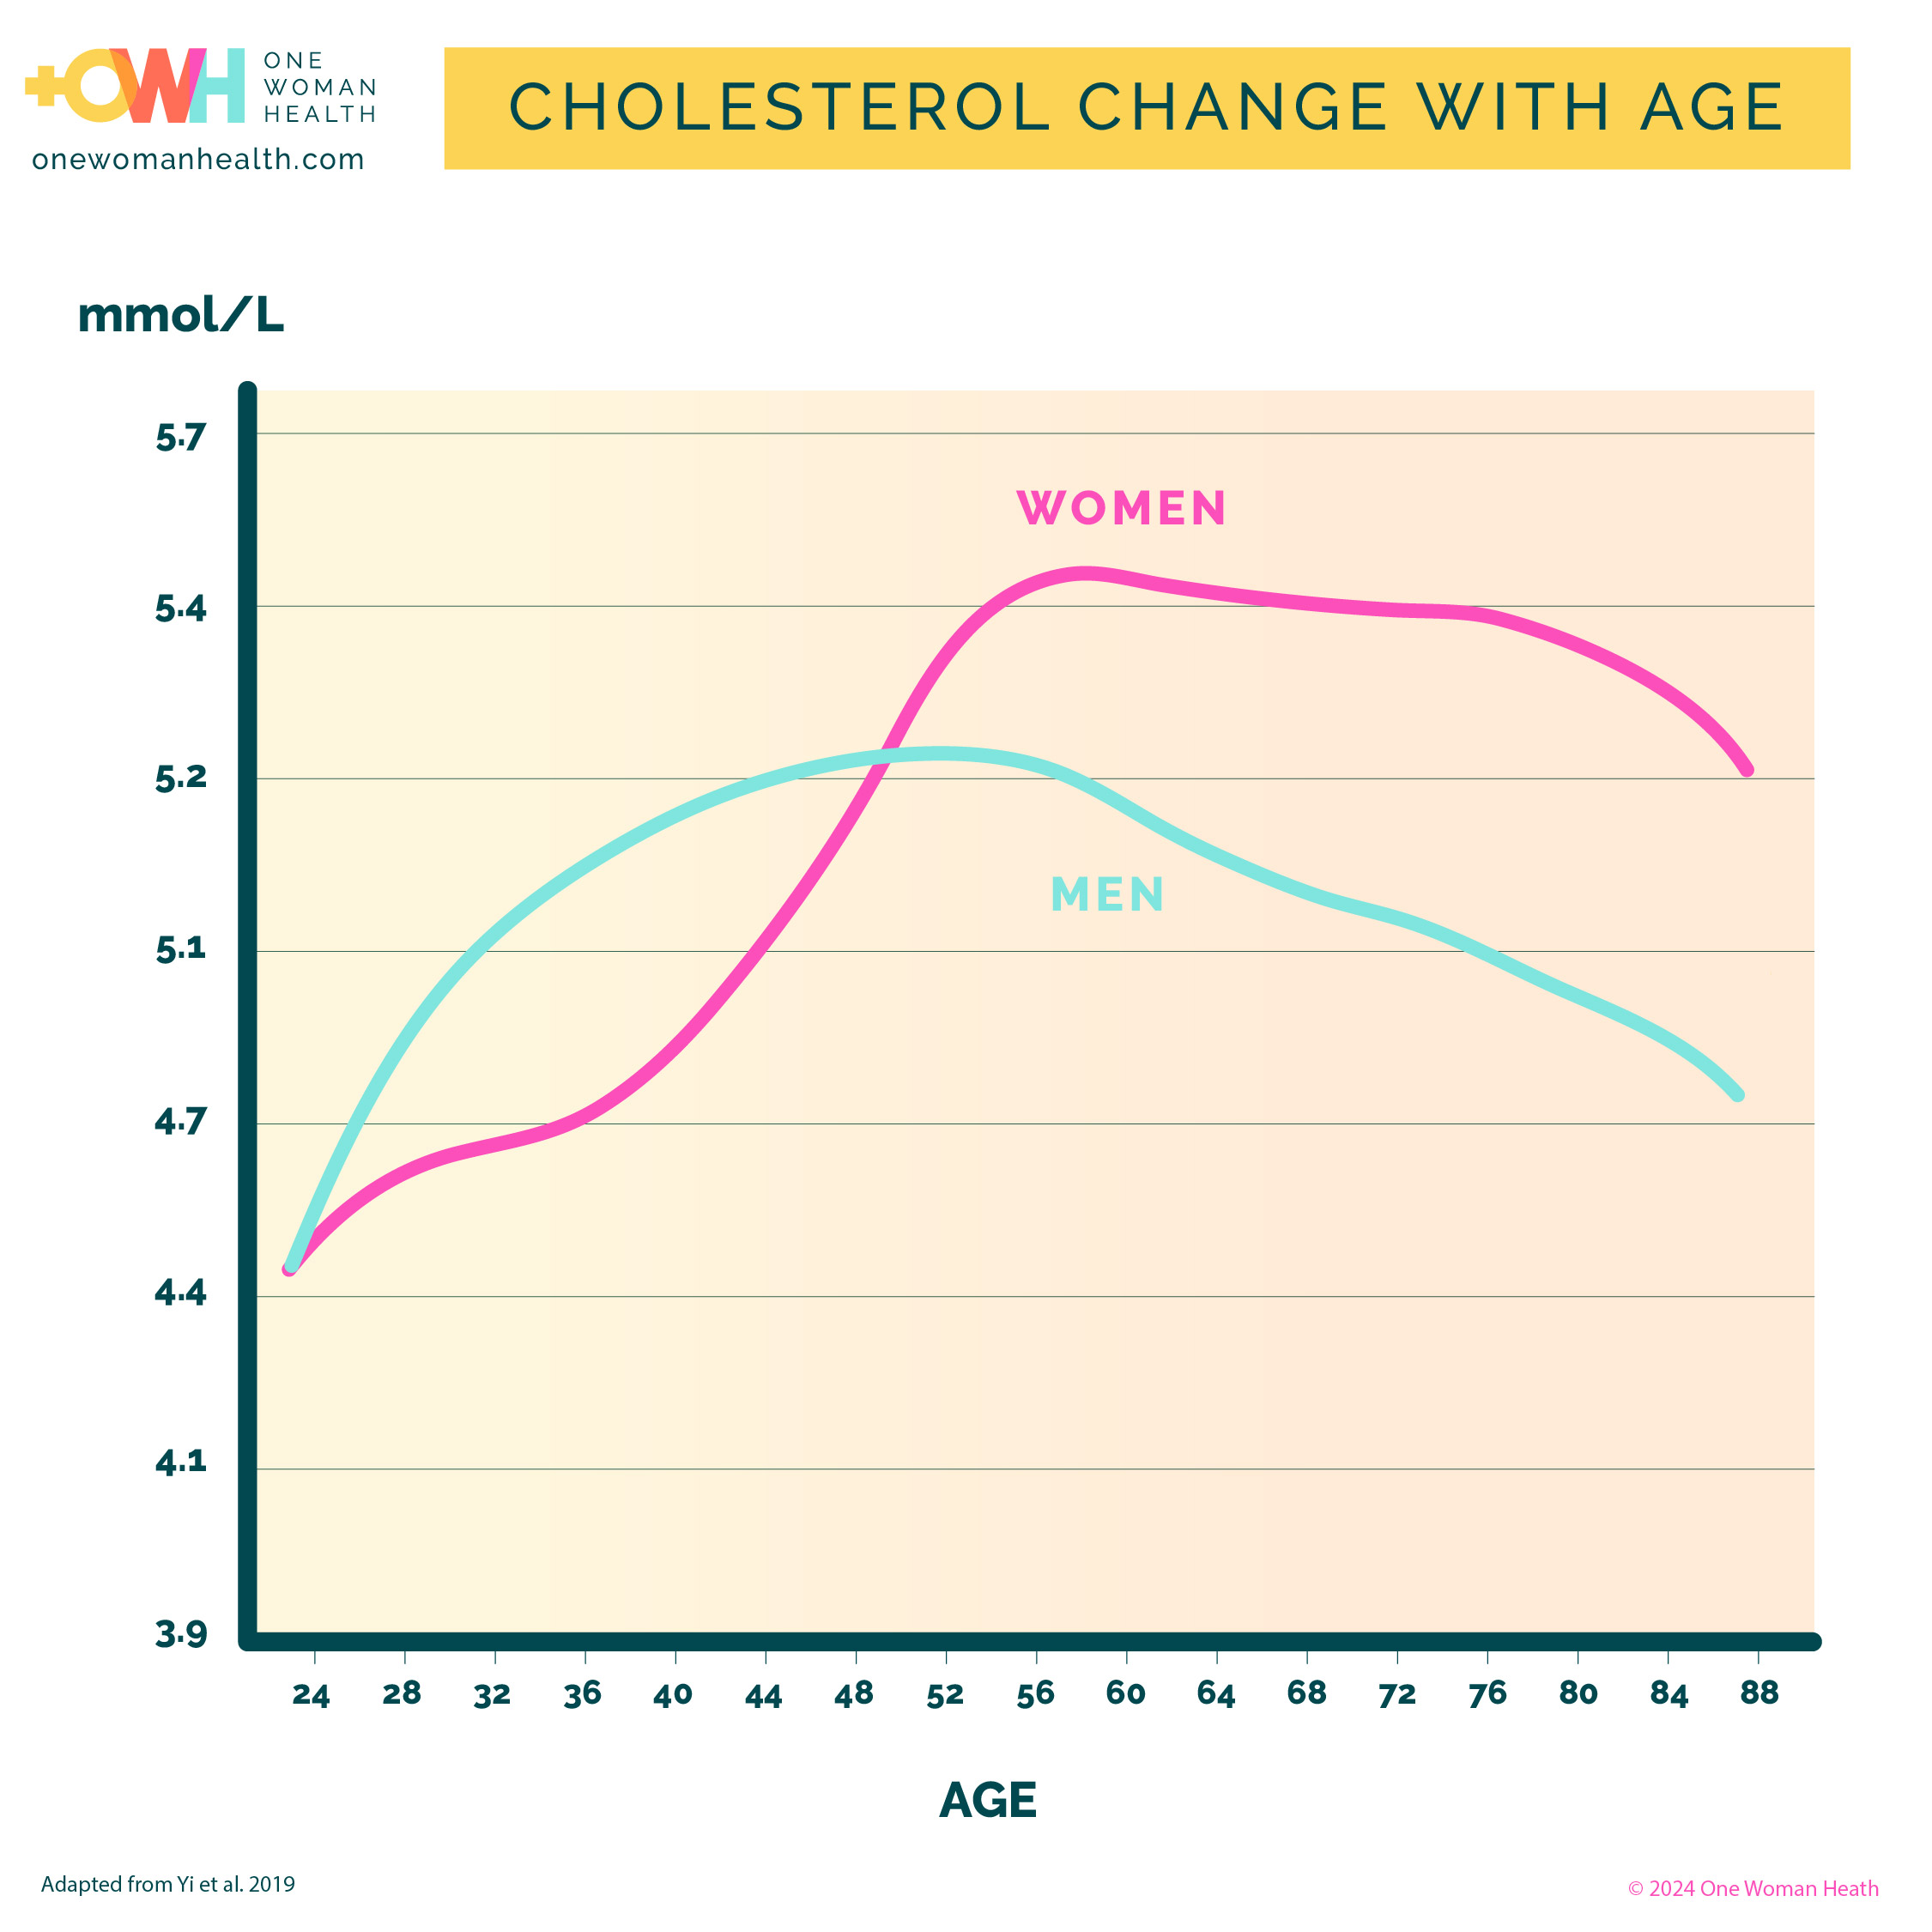 Cholesterol change with age v2 - The menopause in pictures